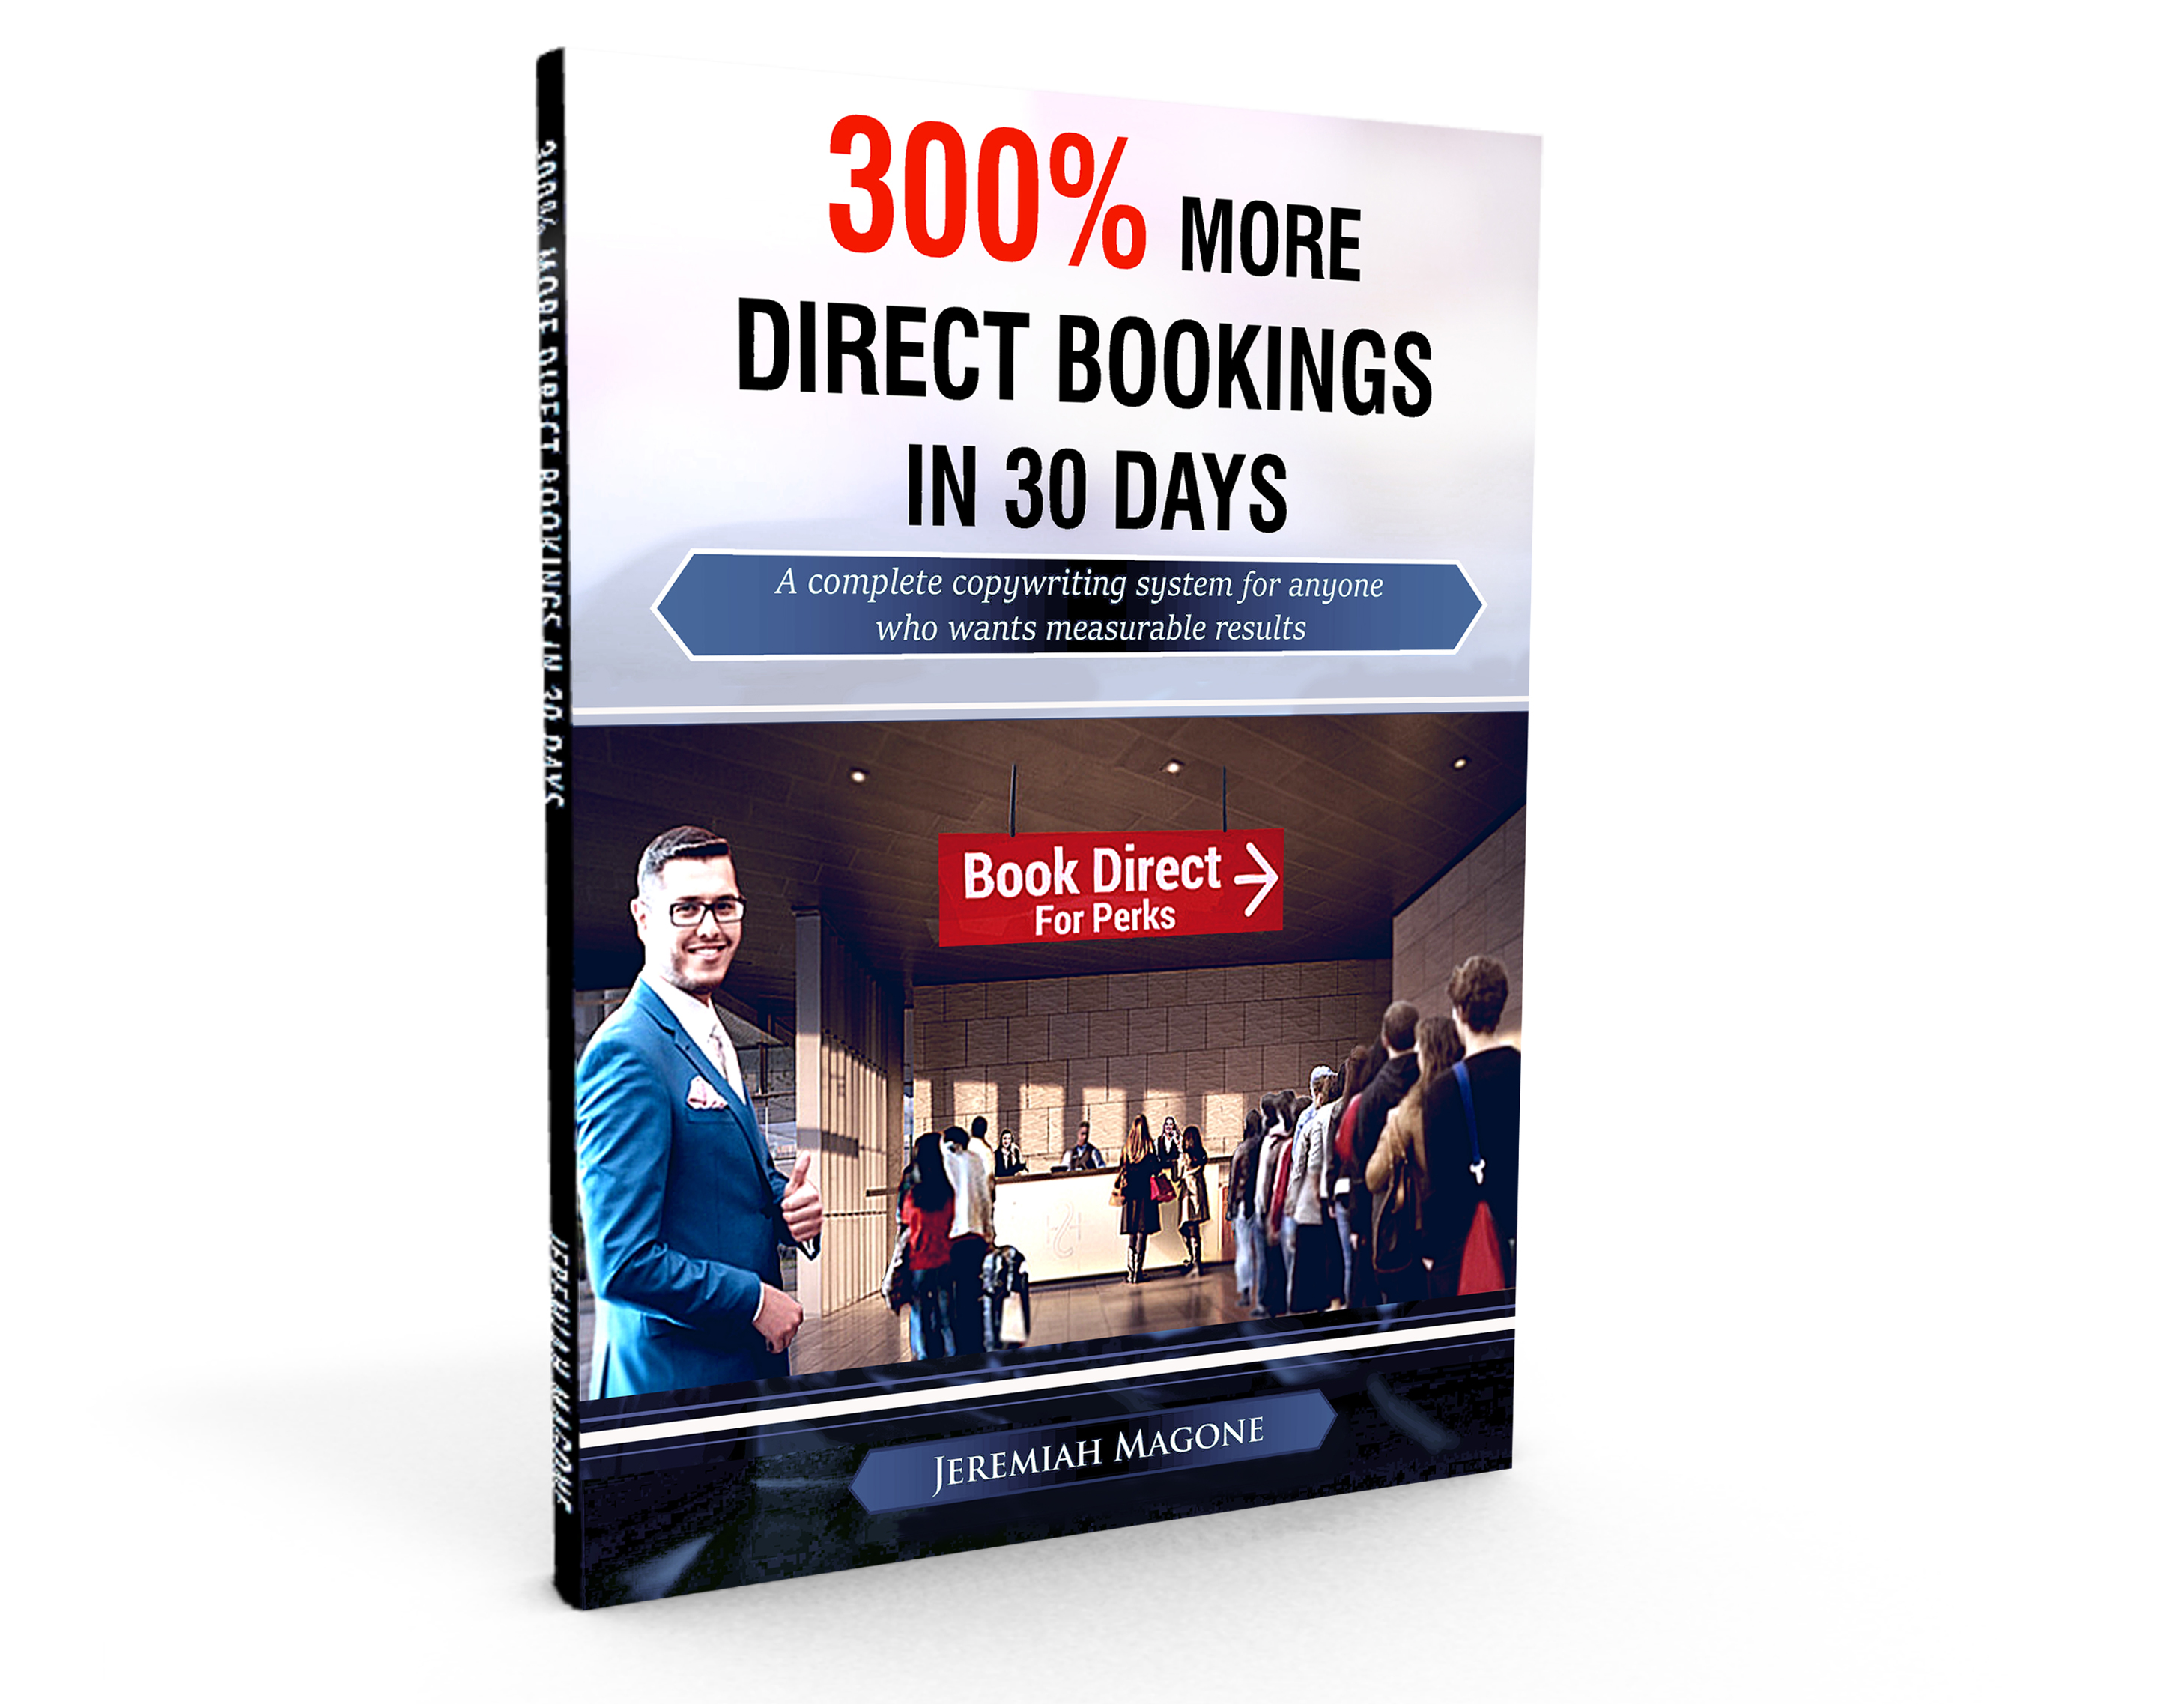 How to get more direct bookings